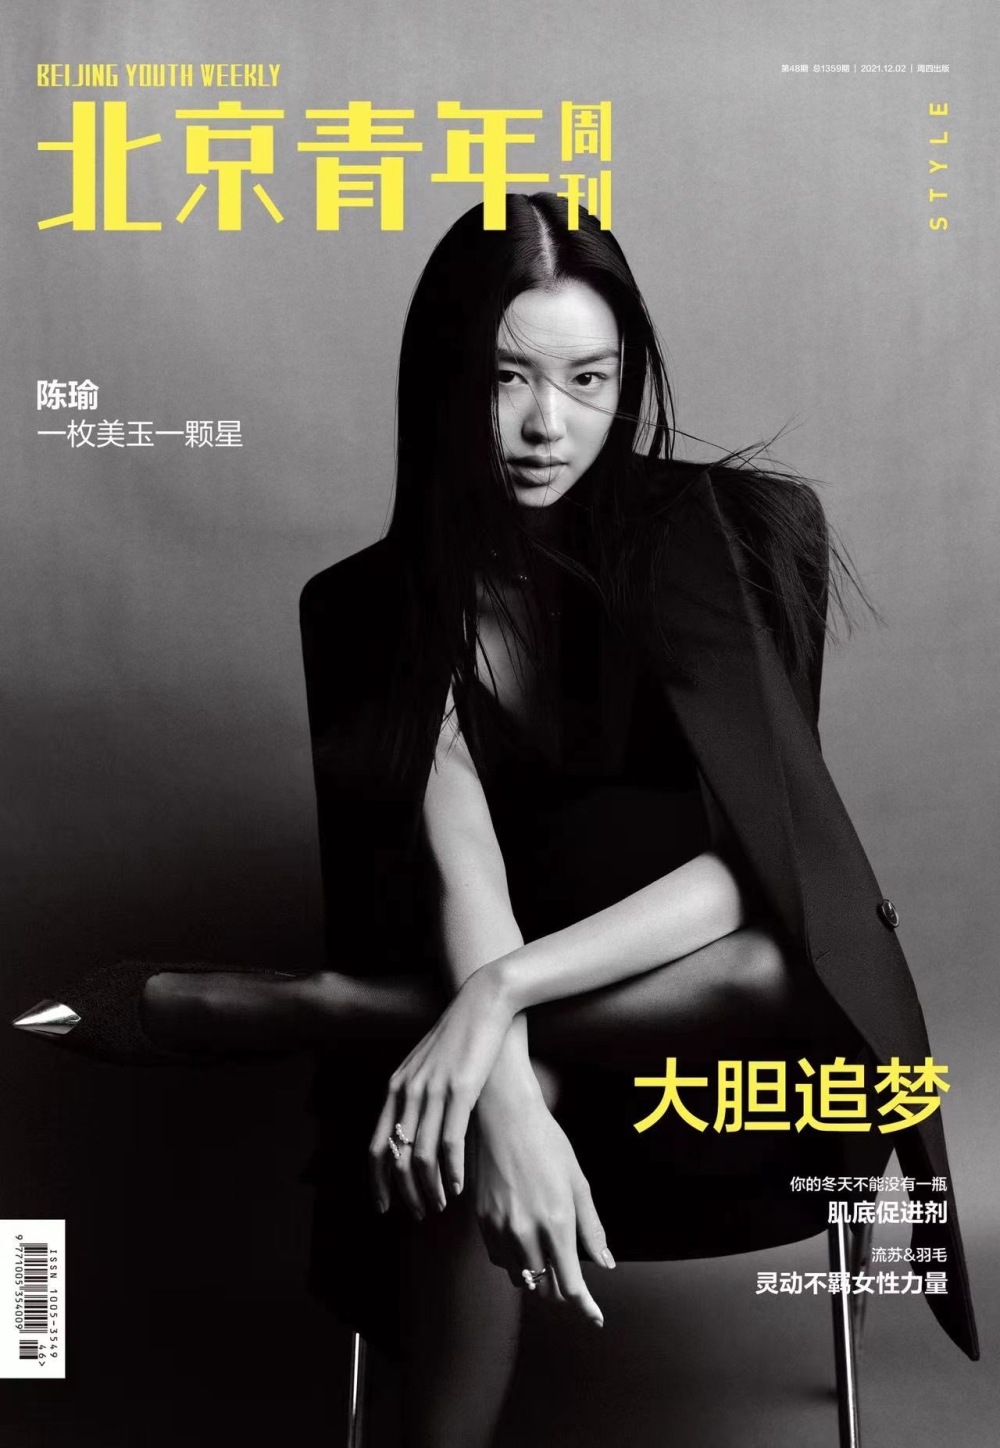 BEIJING YOUTH WEEKLY / 2021 Dec 2nd